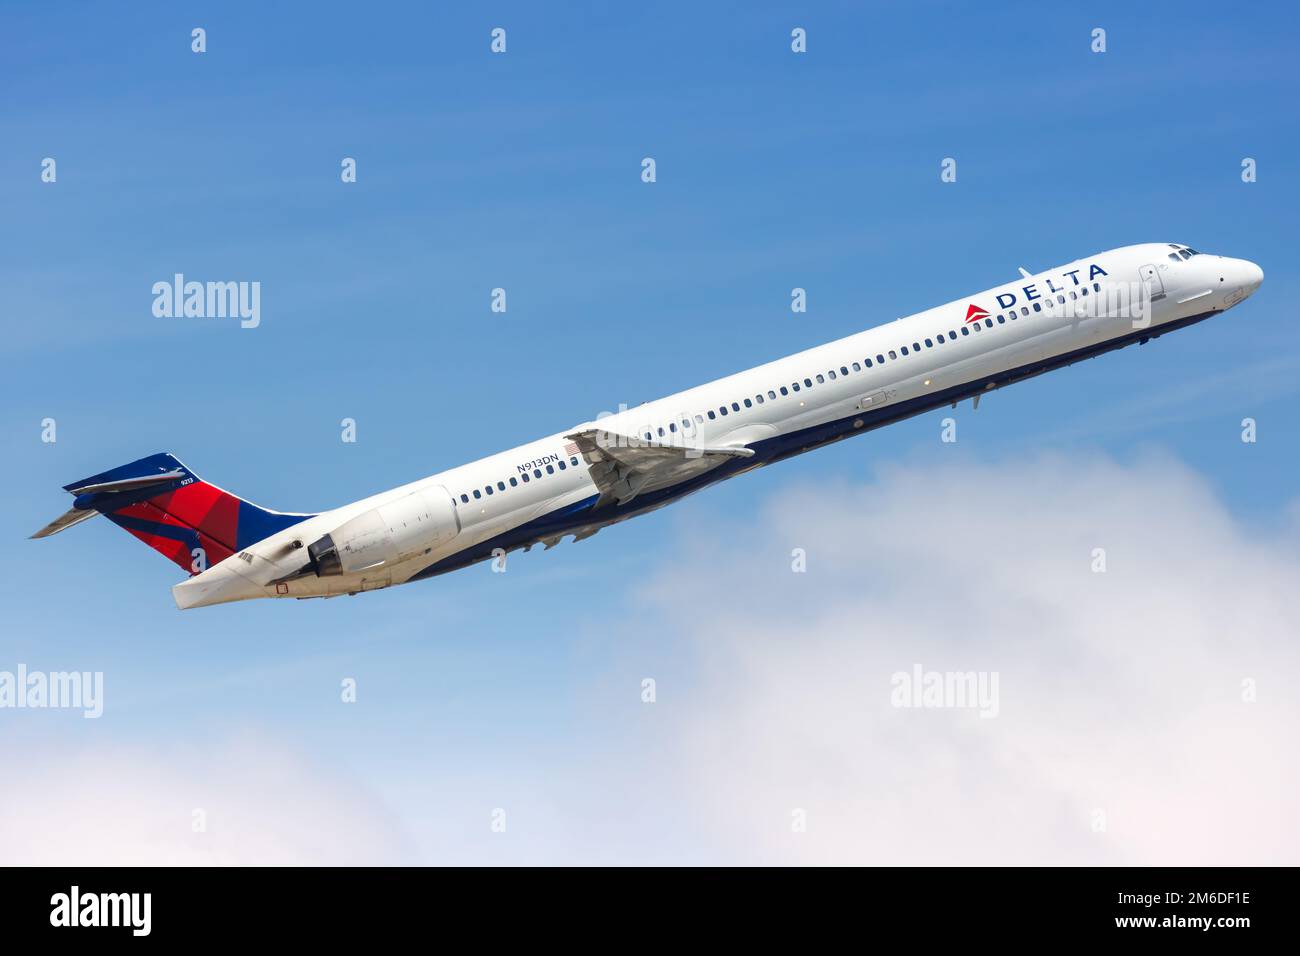 Delta Air Lines McDonnell Douglas MD-90 airplane Fort Lauderdale airport Stock Photo